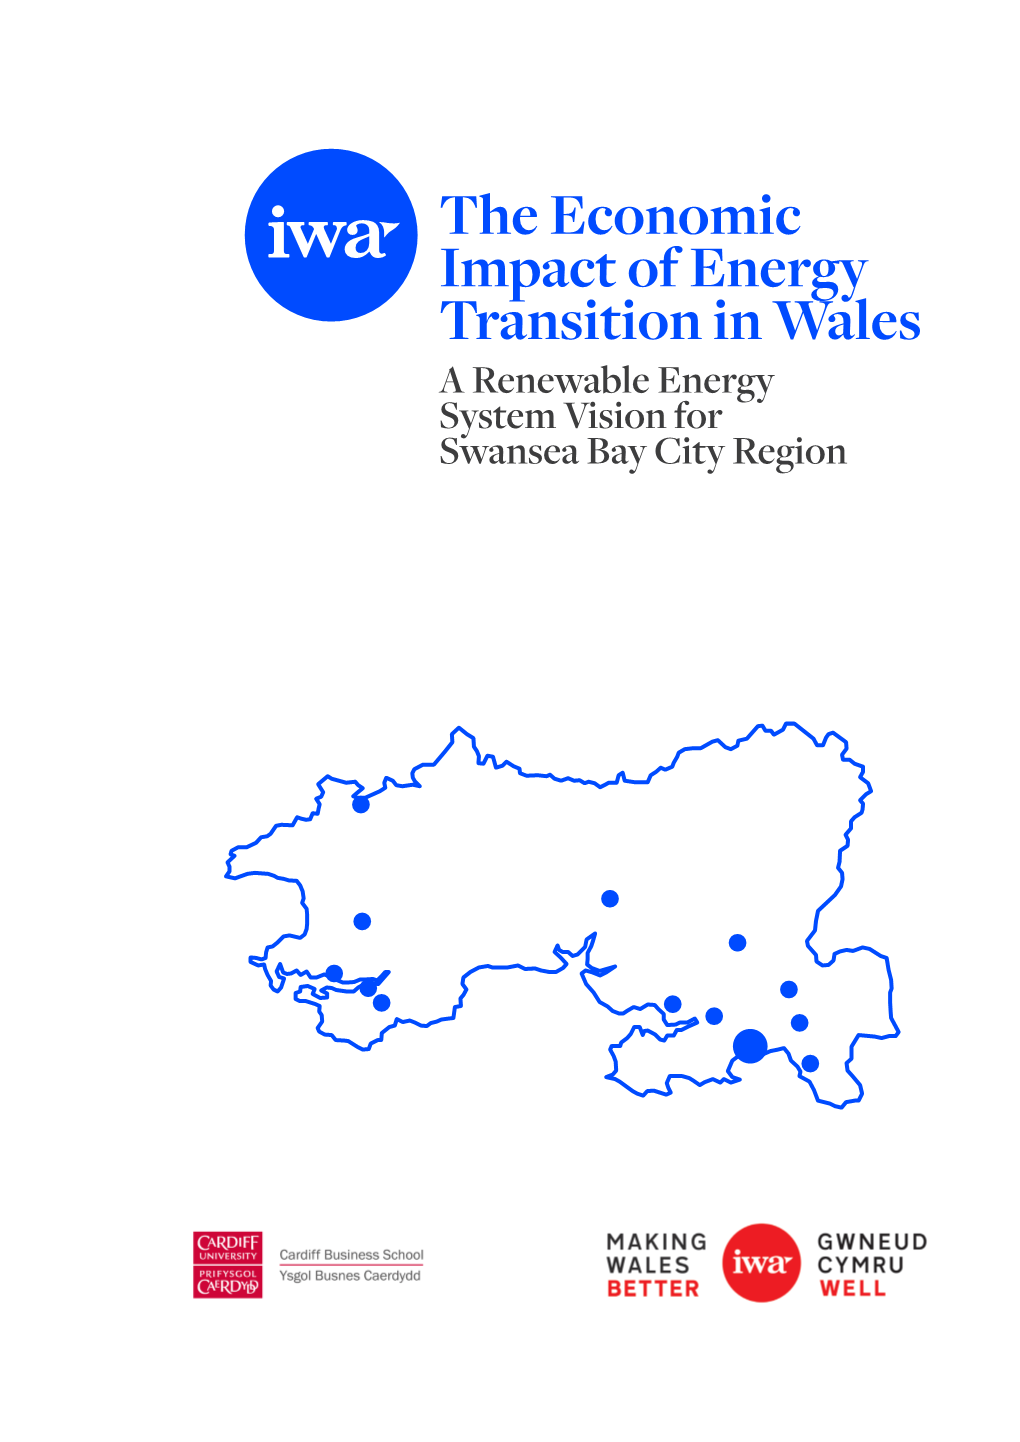 The Economic Impact of Energy Transition in Wales